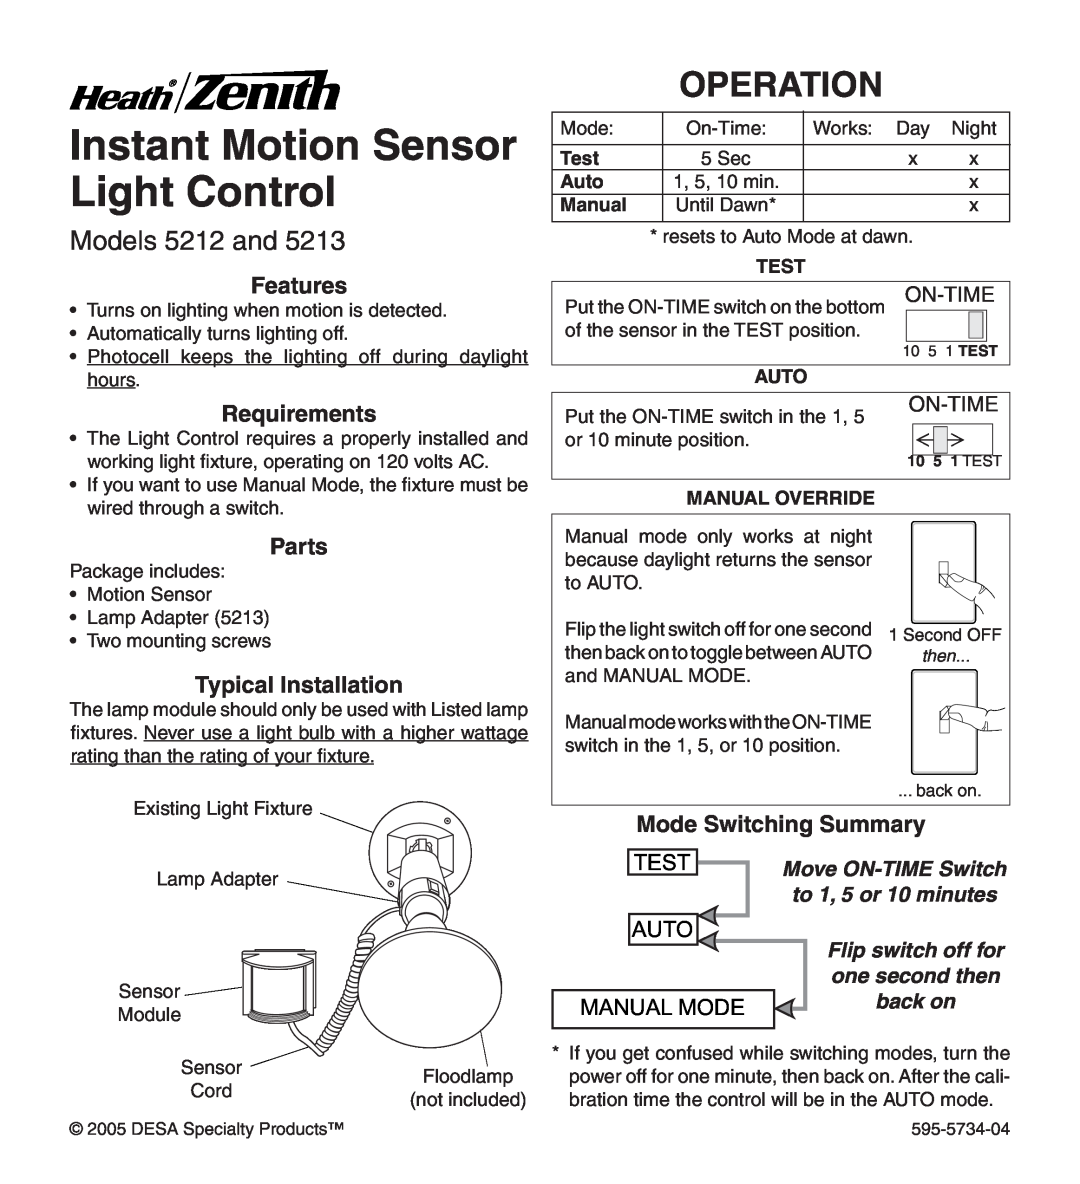 Heath Zenith manual Operation, Models 5212 and, Features, Requirements, Parts, Typical Installation, On-Time, Test 